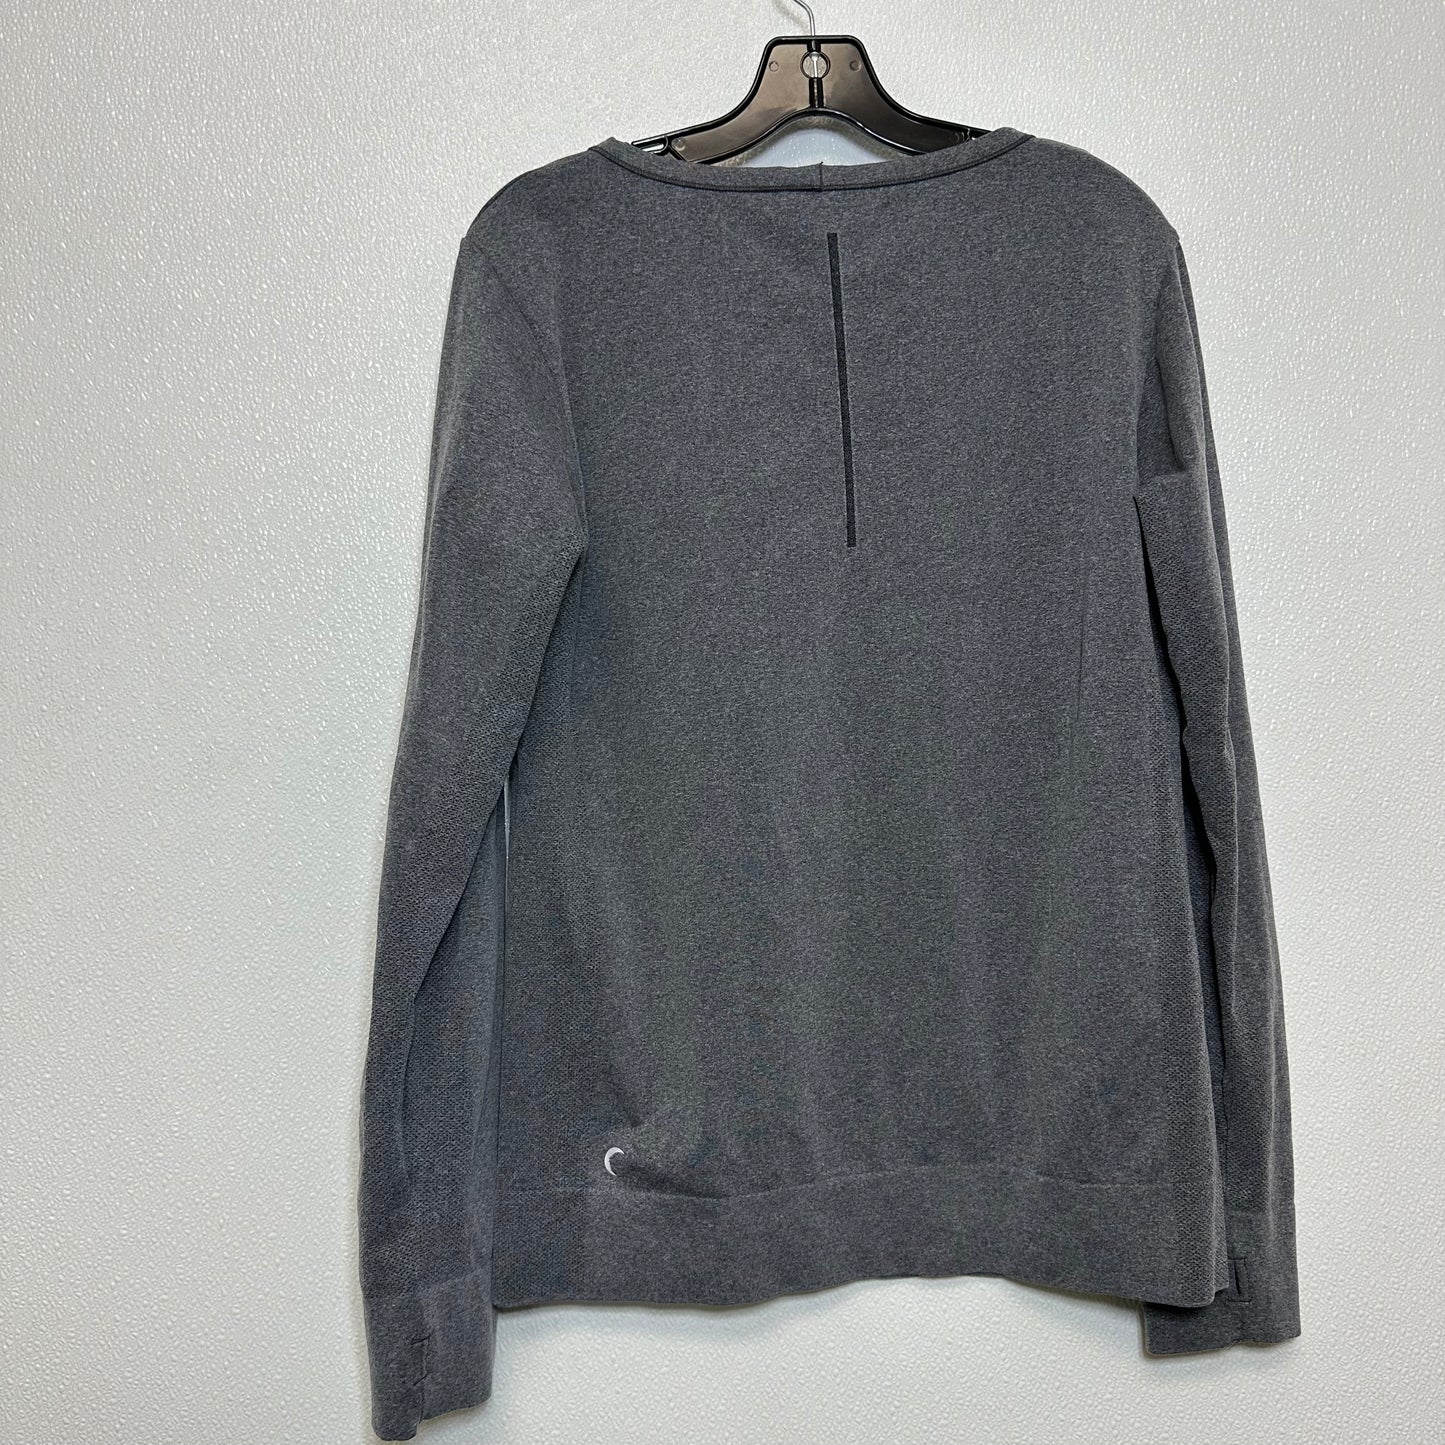 Athletic Top Long Sleeve Crewneck By Zyia  Size: Xl